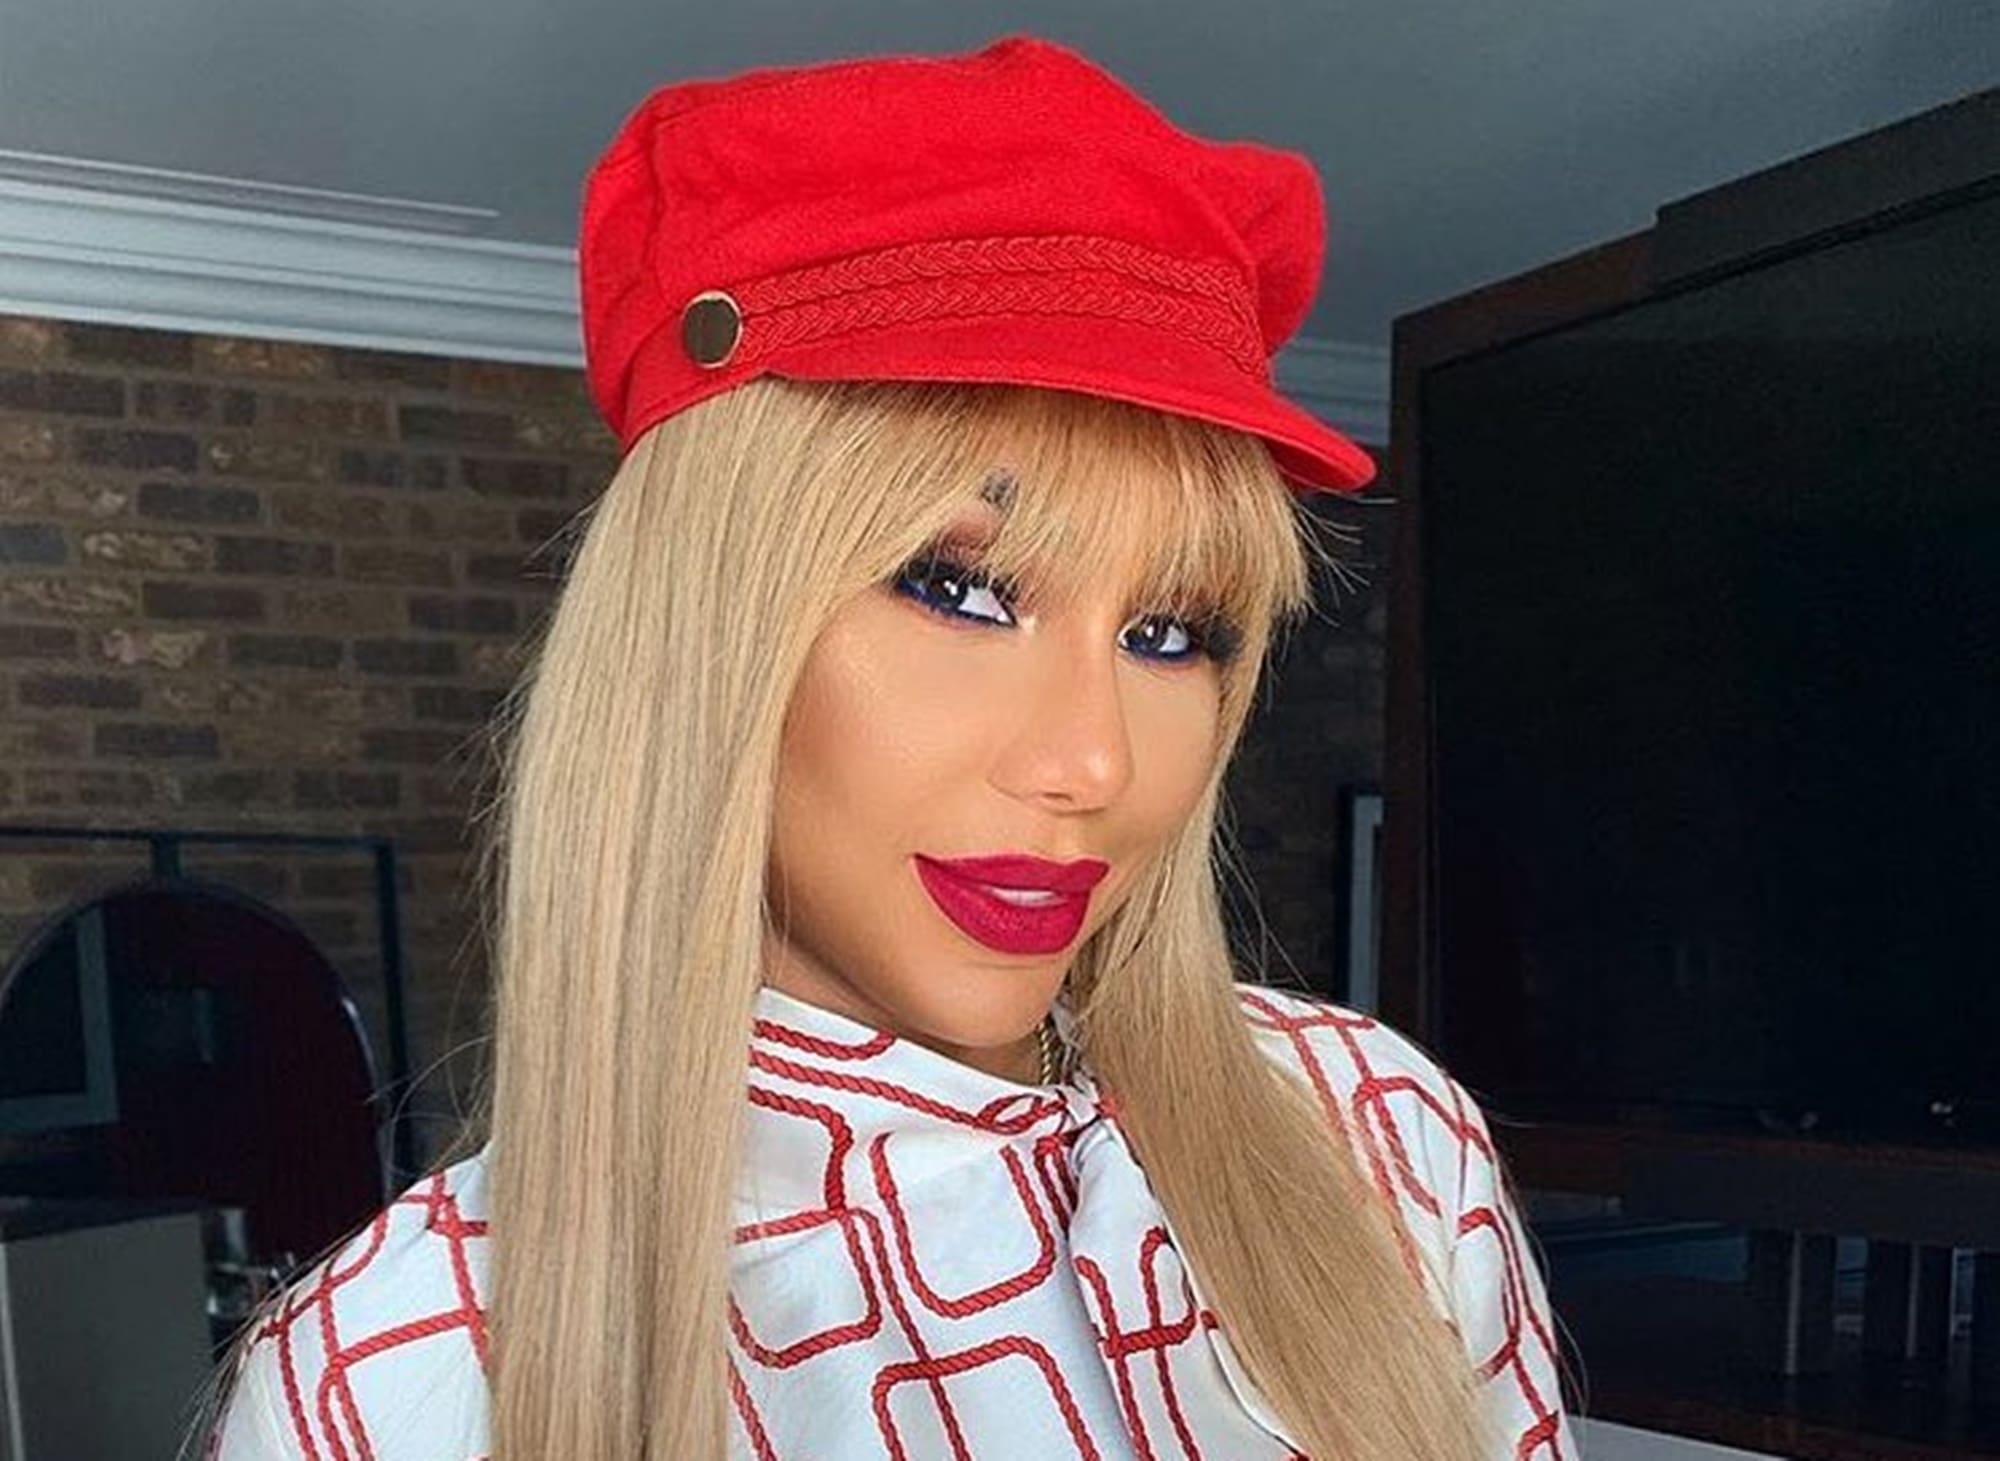 ”tamar-braxton-shares-delightful-picture-and-message-to-sister-trina-and-her-future-husband-von-scales-after-self-centered-tantrum-when-they-got-engaged”